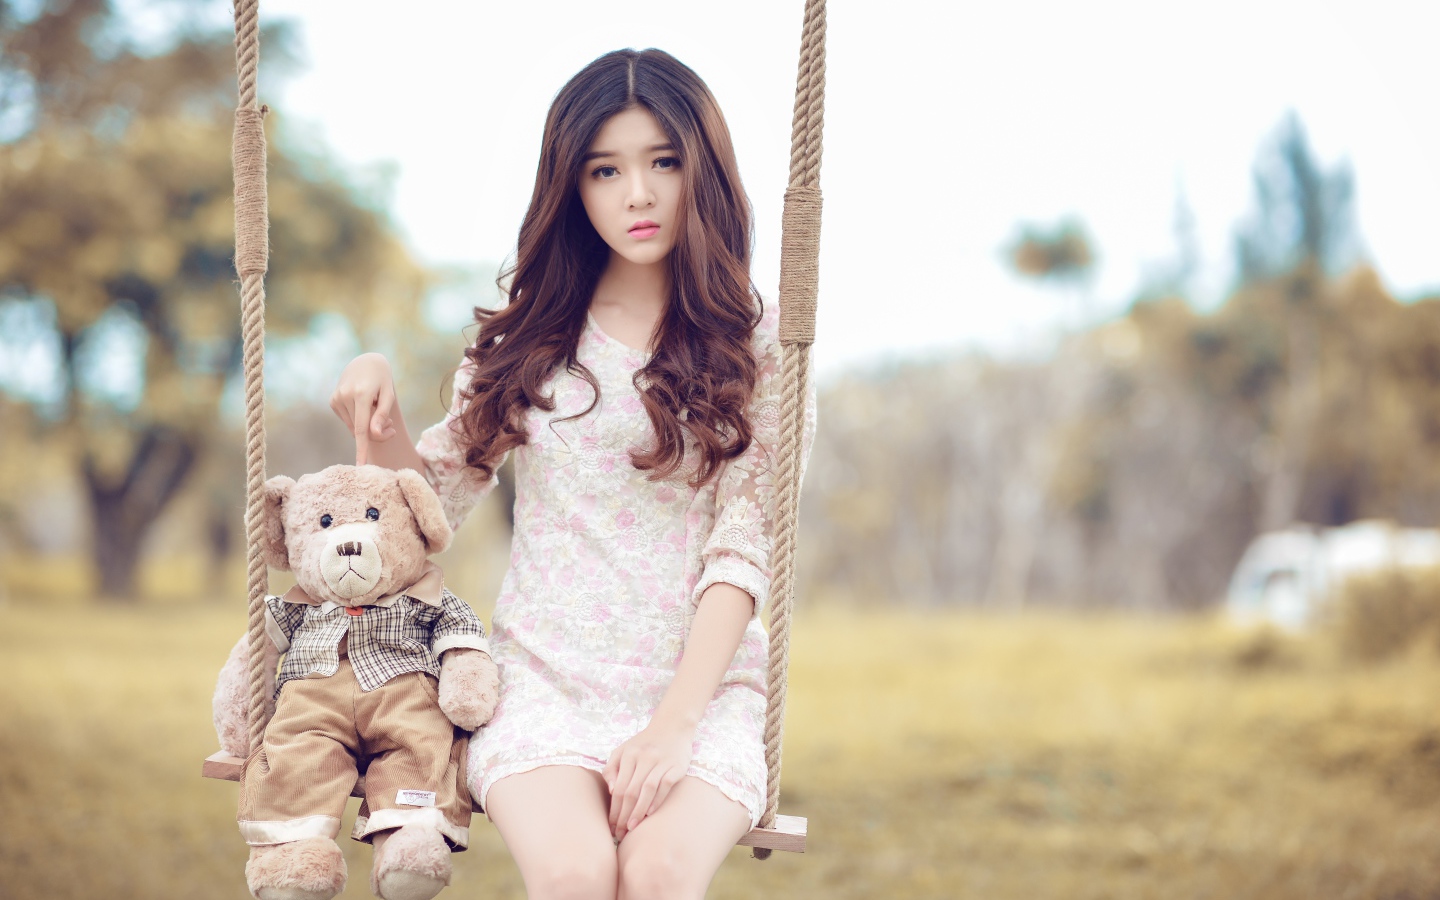 Asian girl sitting on a swing with a teddy bear.